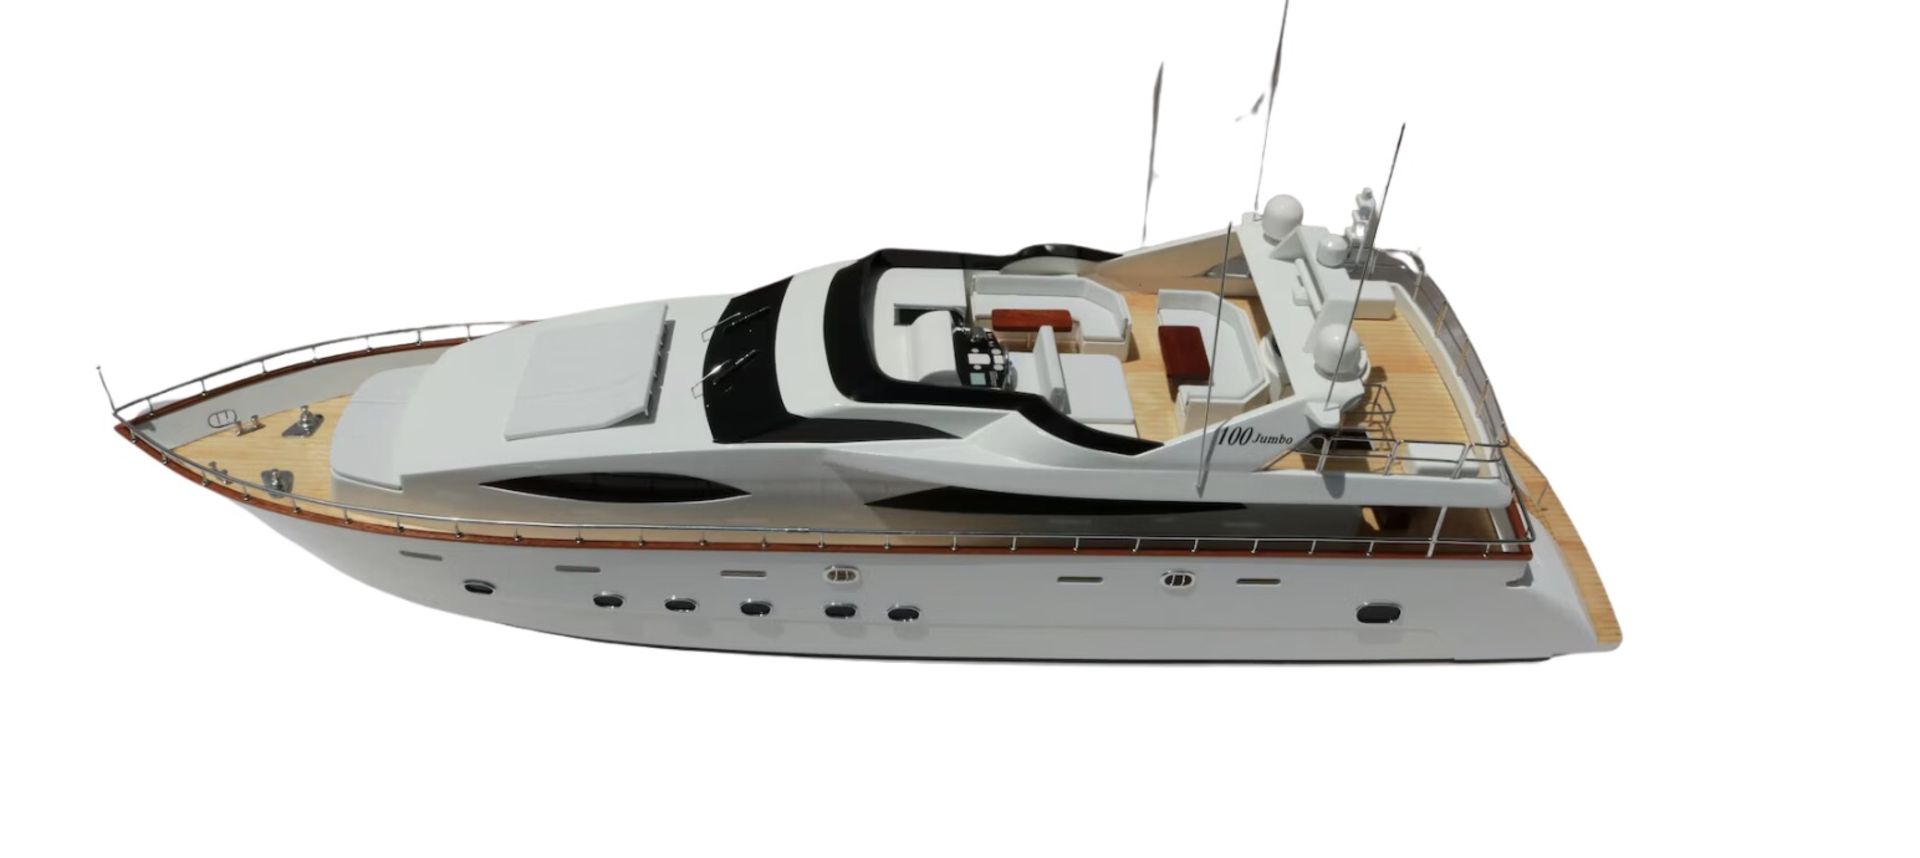 Azimut 100 Yacht Wooden Scale Desk Display - Image 7 of 8